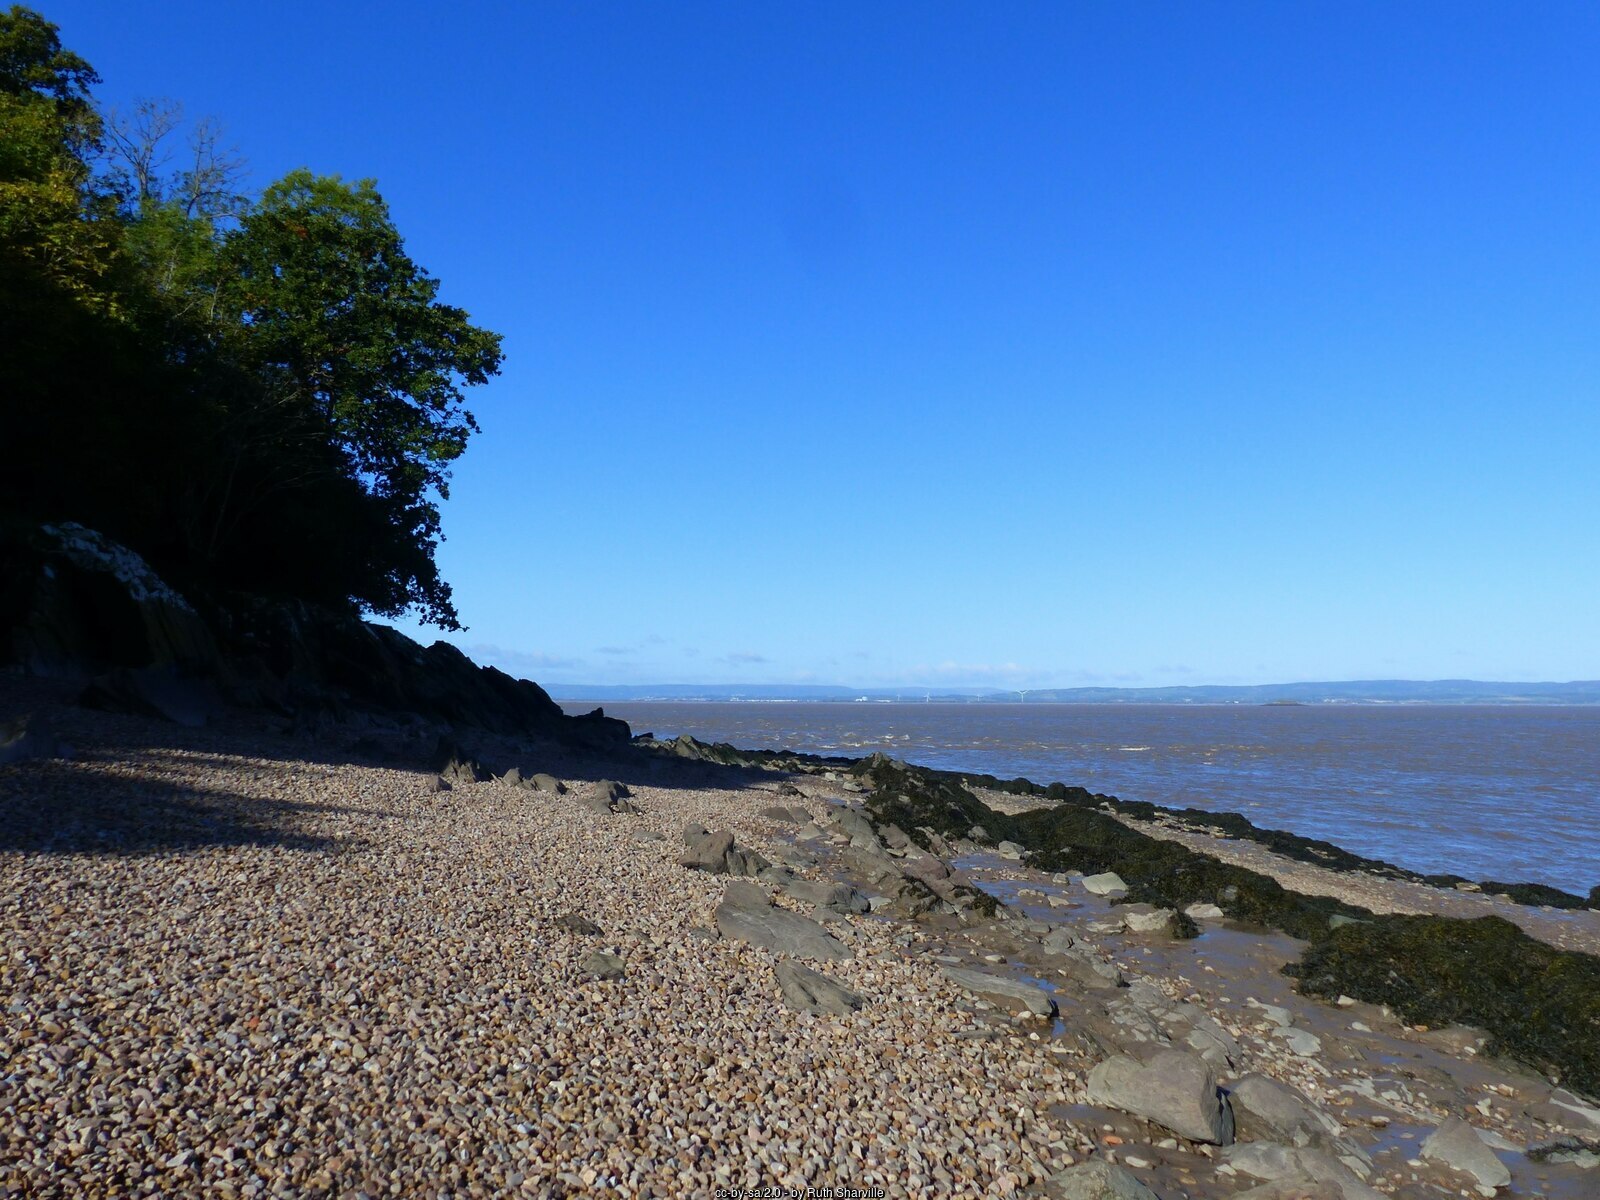 Beach near to the pier in Portishead